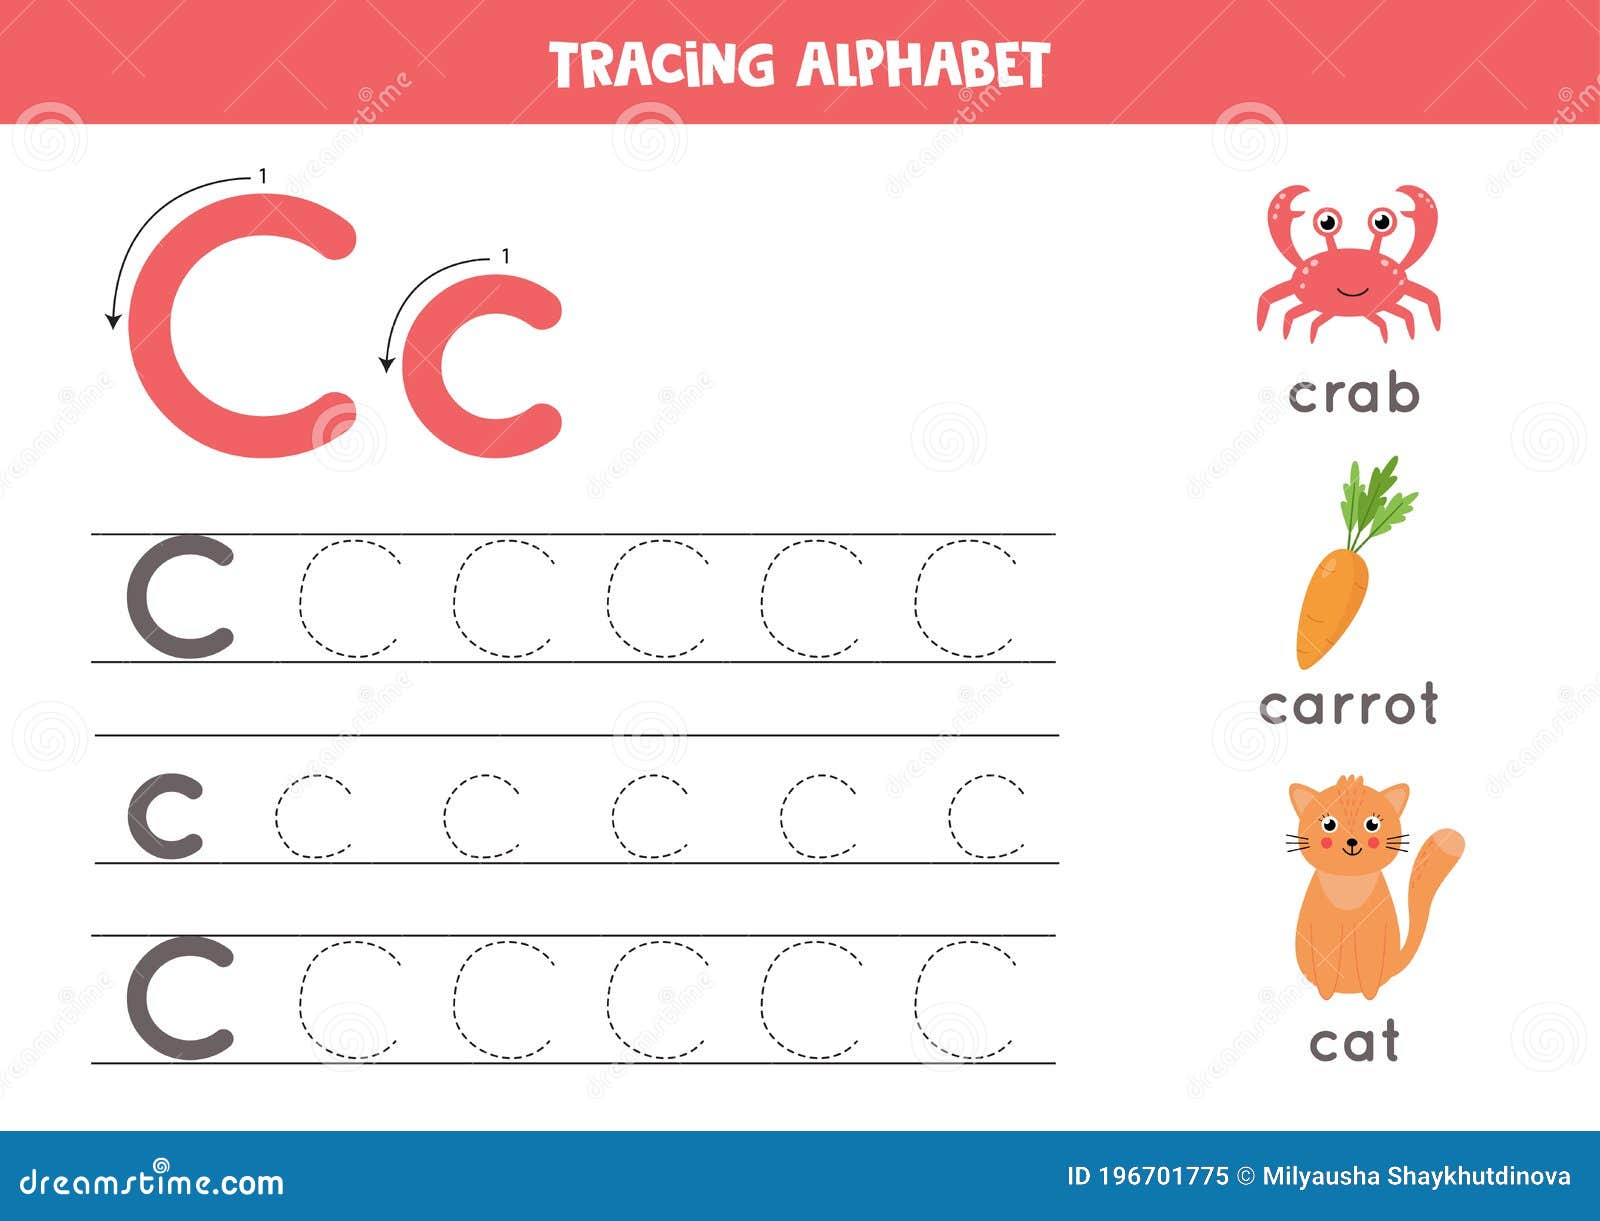 C is for Cat, Crab, Carrot. Tracing English Alphabet Worksheet